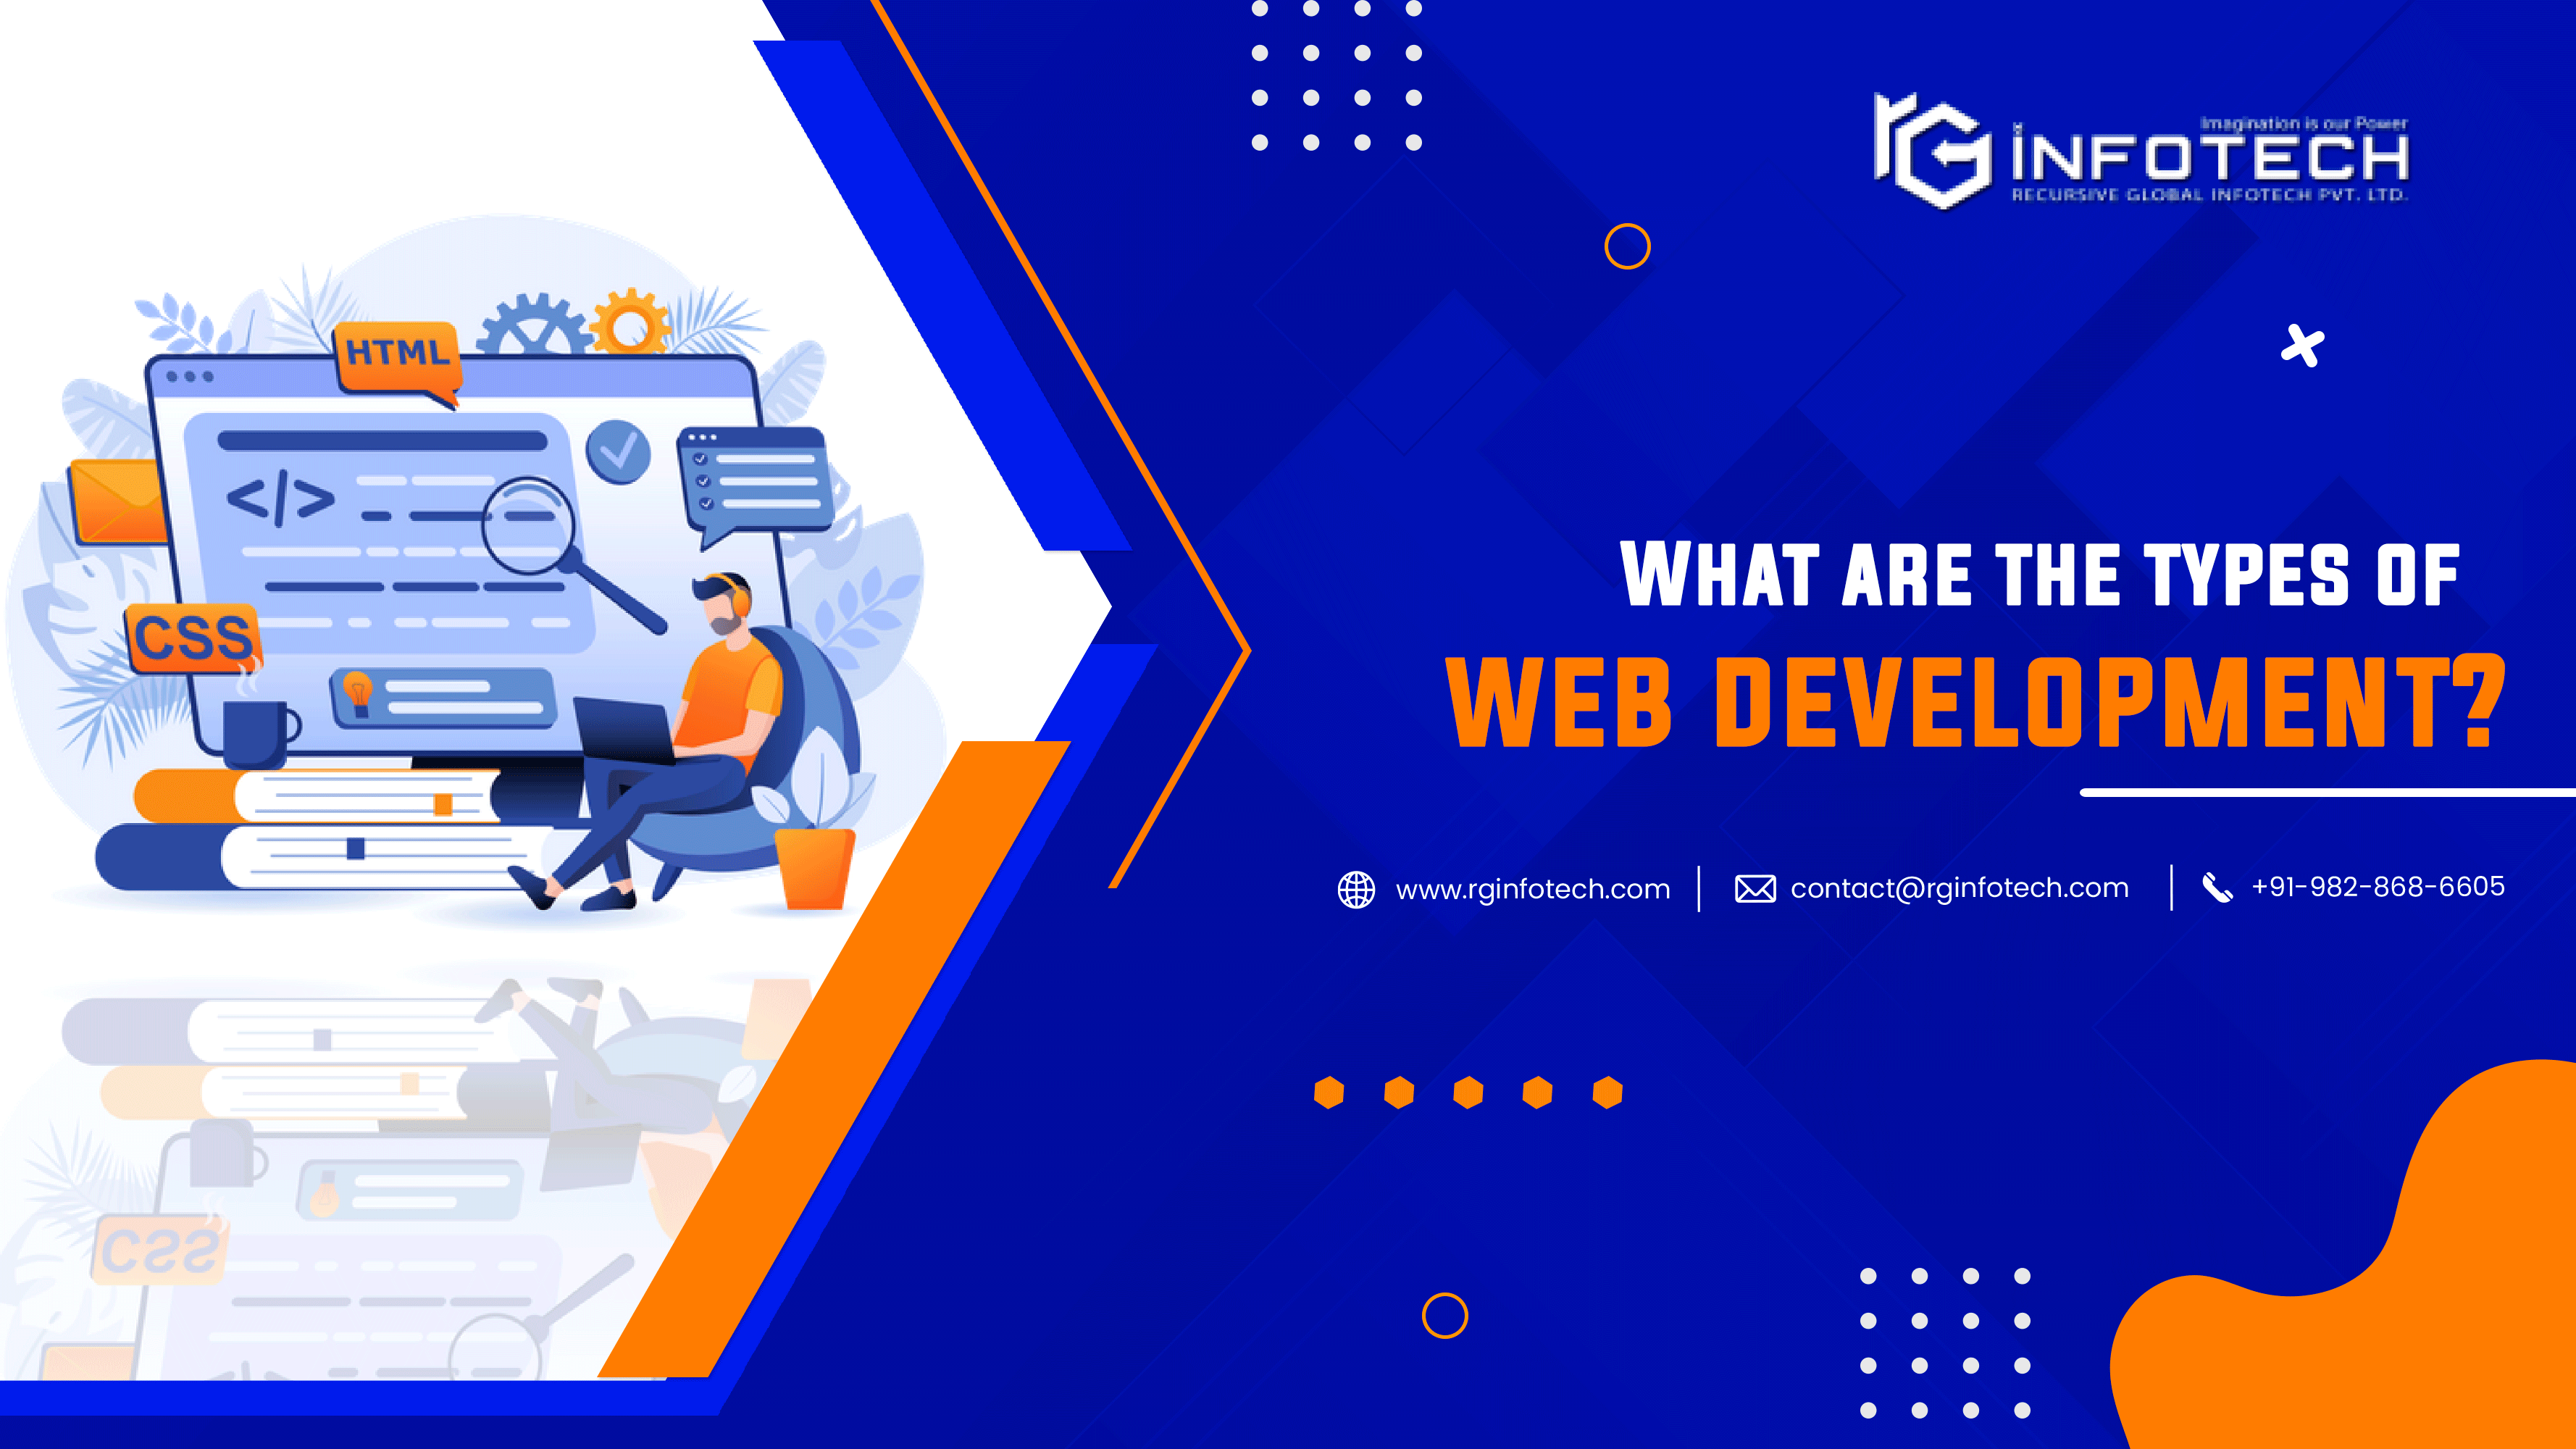 What are the types of web development